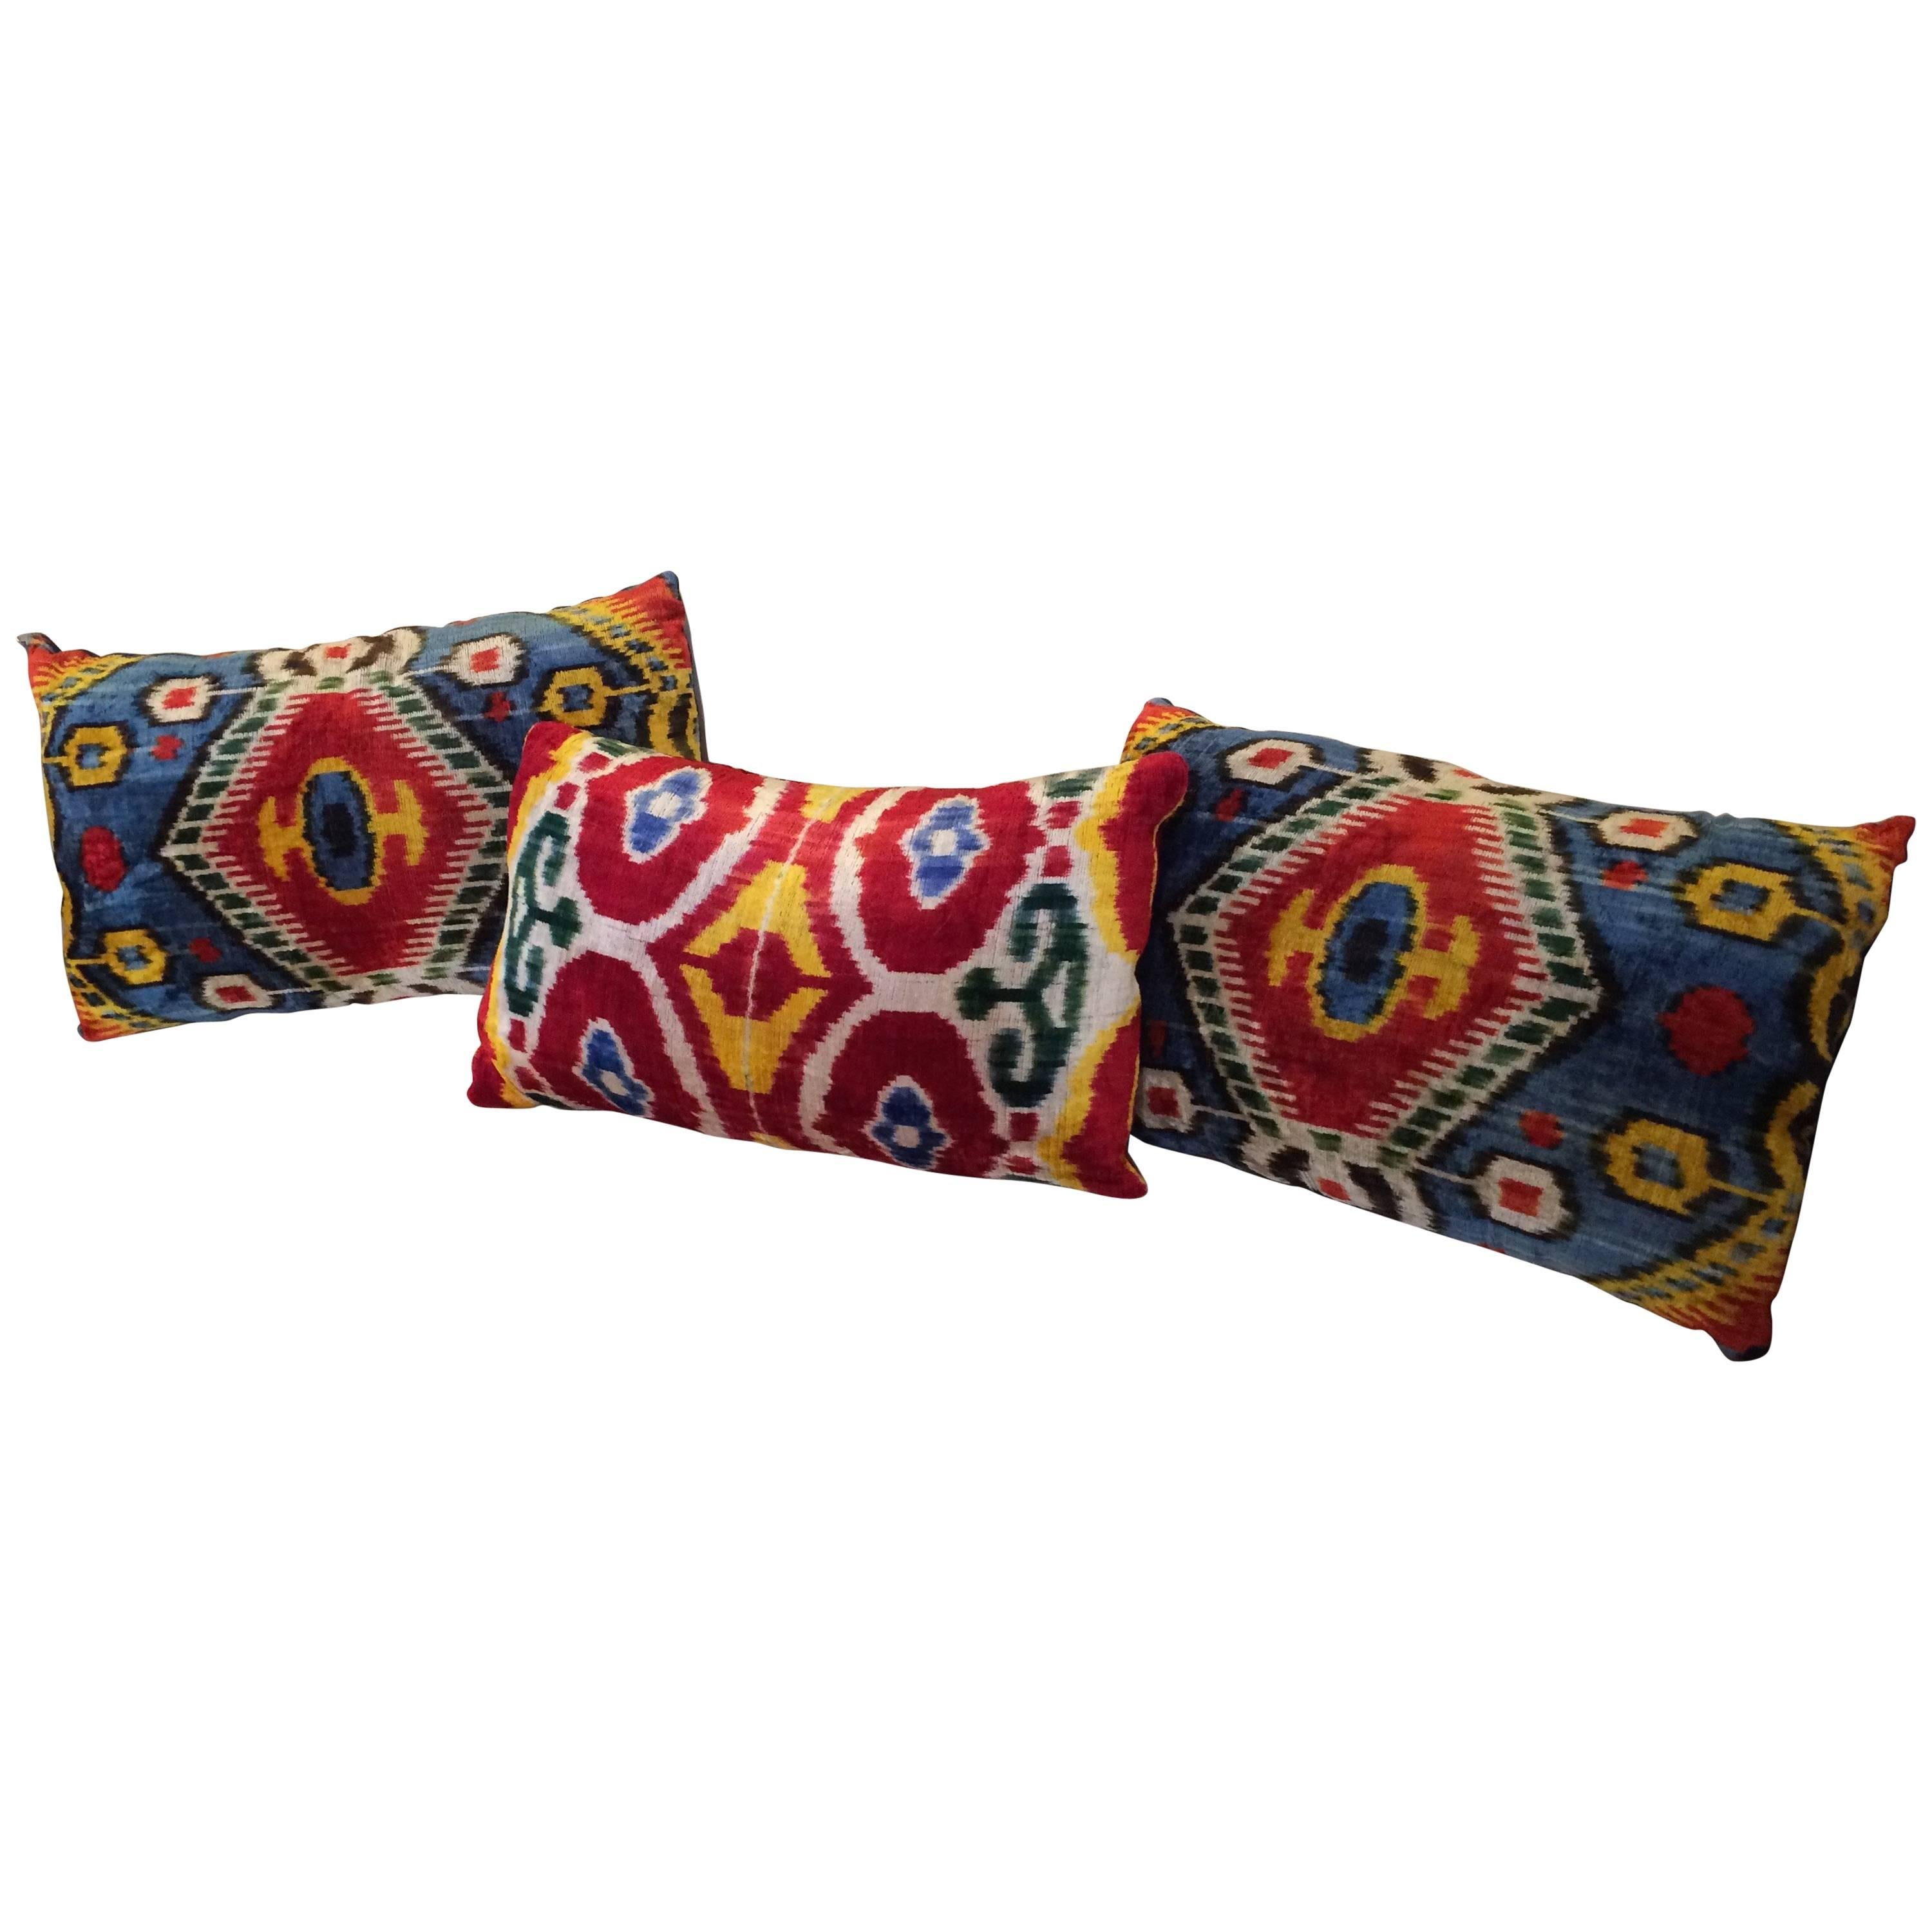 Vibrant one-of-a-kind pillows in hand dyed silk velvet from Uzbekistan.
Measures: Blue pillows 21 x 15 x 4.5
Red pillows 20 x 13 x 4.5.